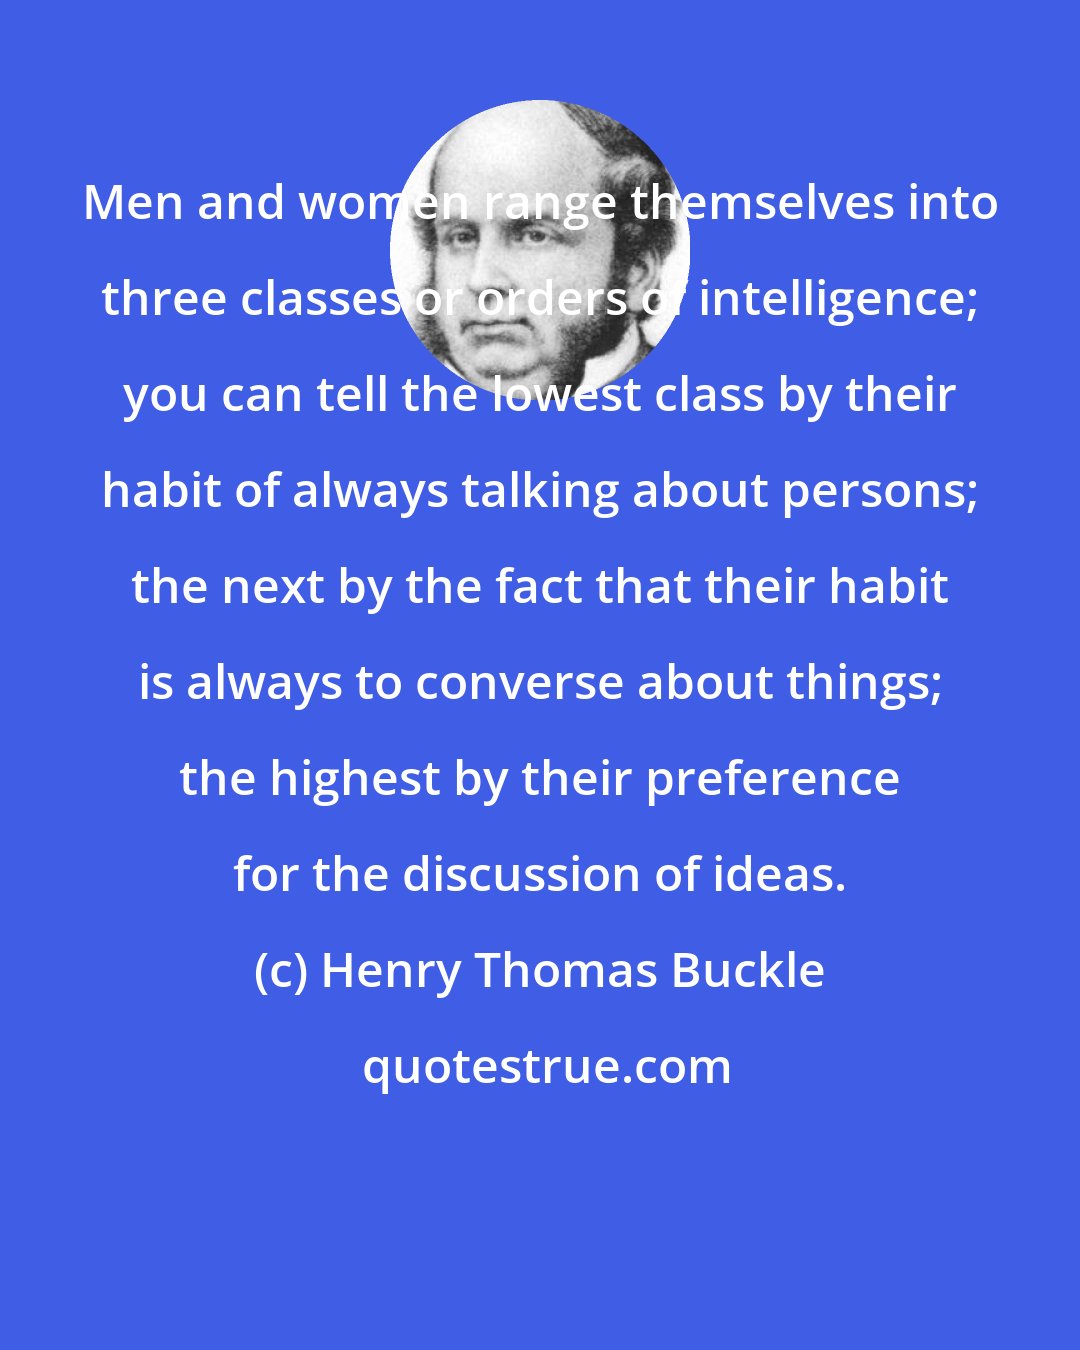 Henry Thomas Buckle: Men and women range themselves into three classes or orders of intelligence; you can tell the lowest class by their habit of always talking about persons; the next by the fact that their habit is always to converse about things; the highest by their preference for the discussion of ideas.